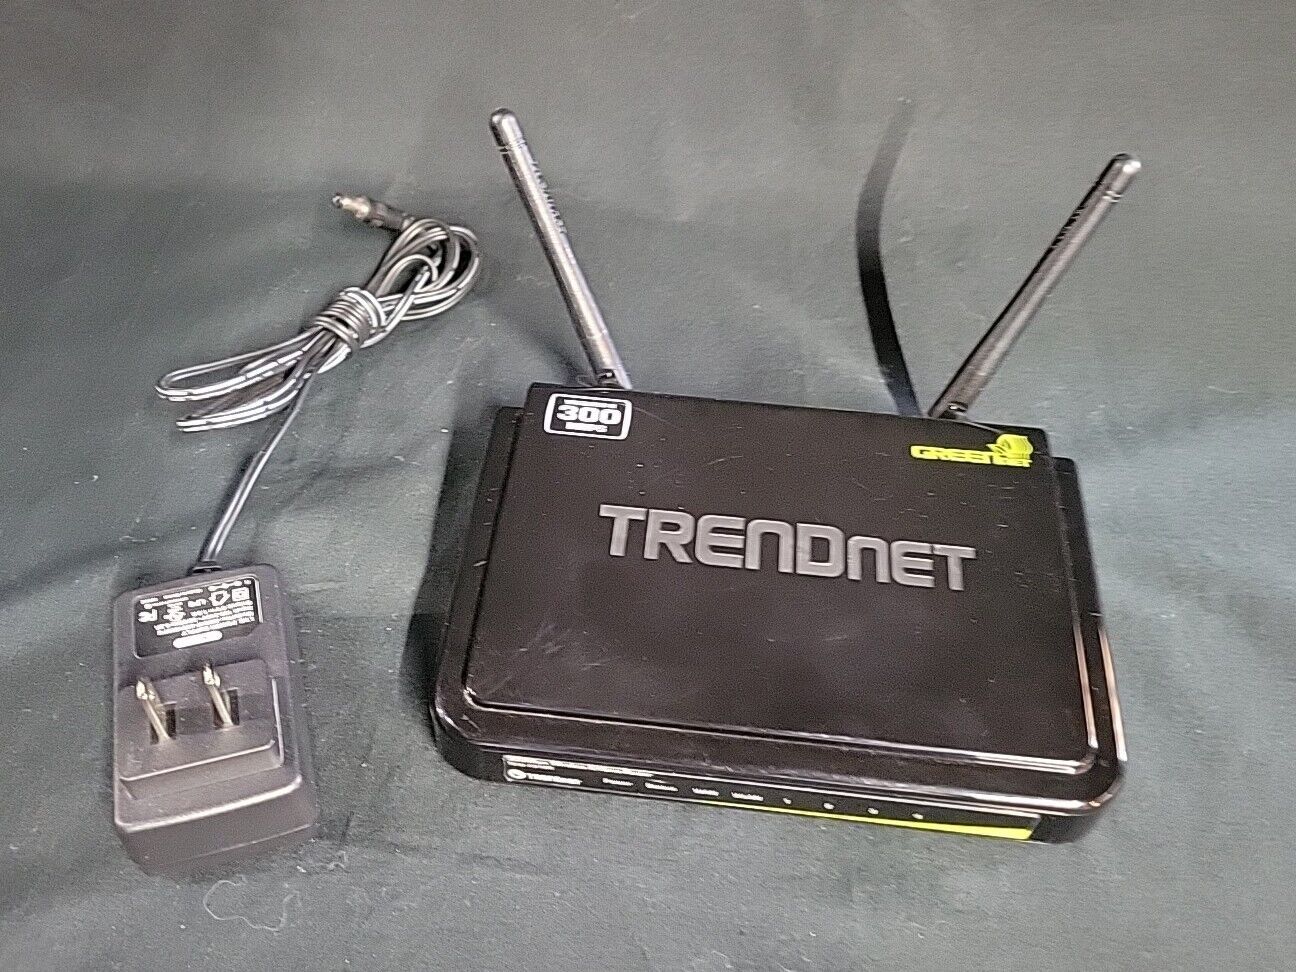 Trendnet TEW-652BRP 300 Mbps Wireless N Home Router TESTED and PROVEN